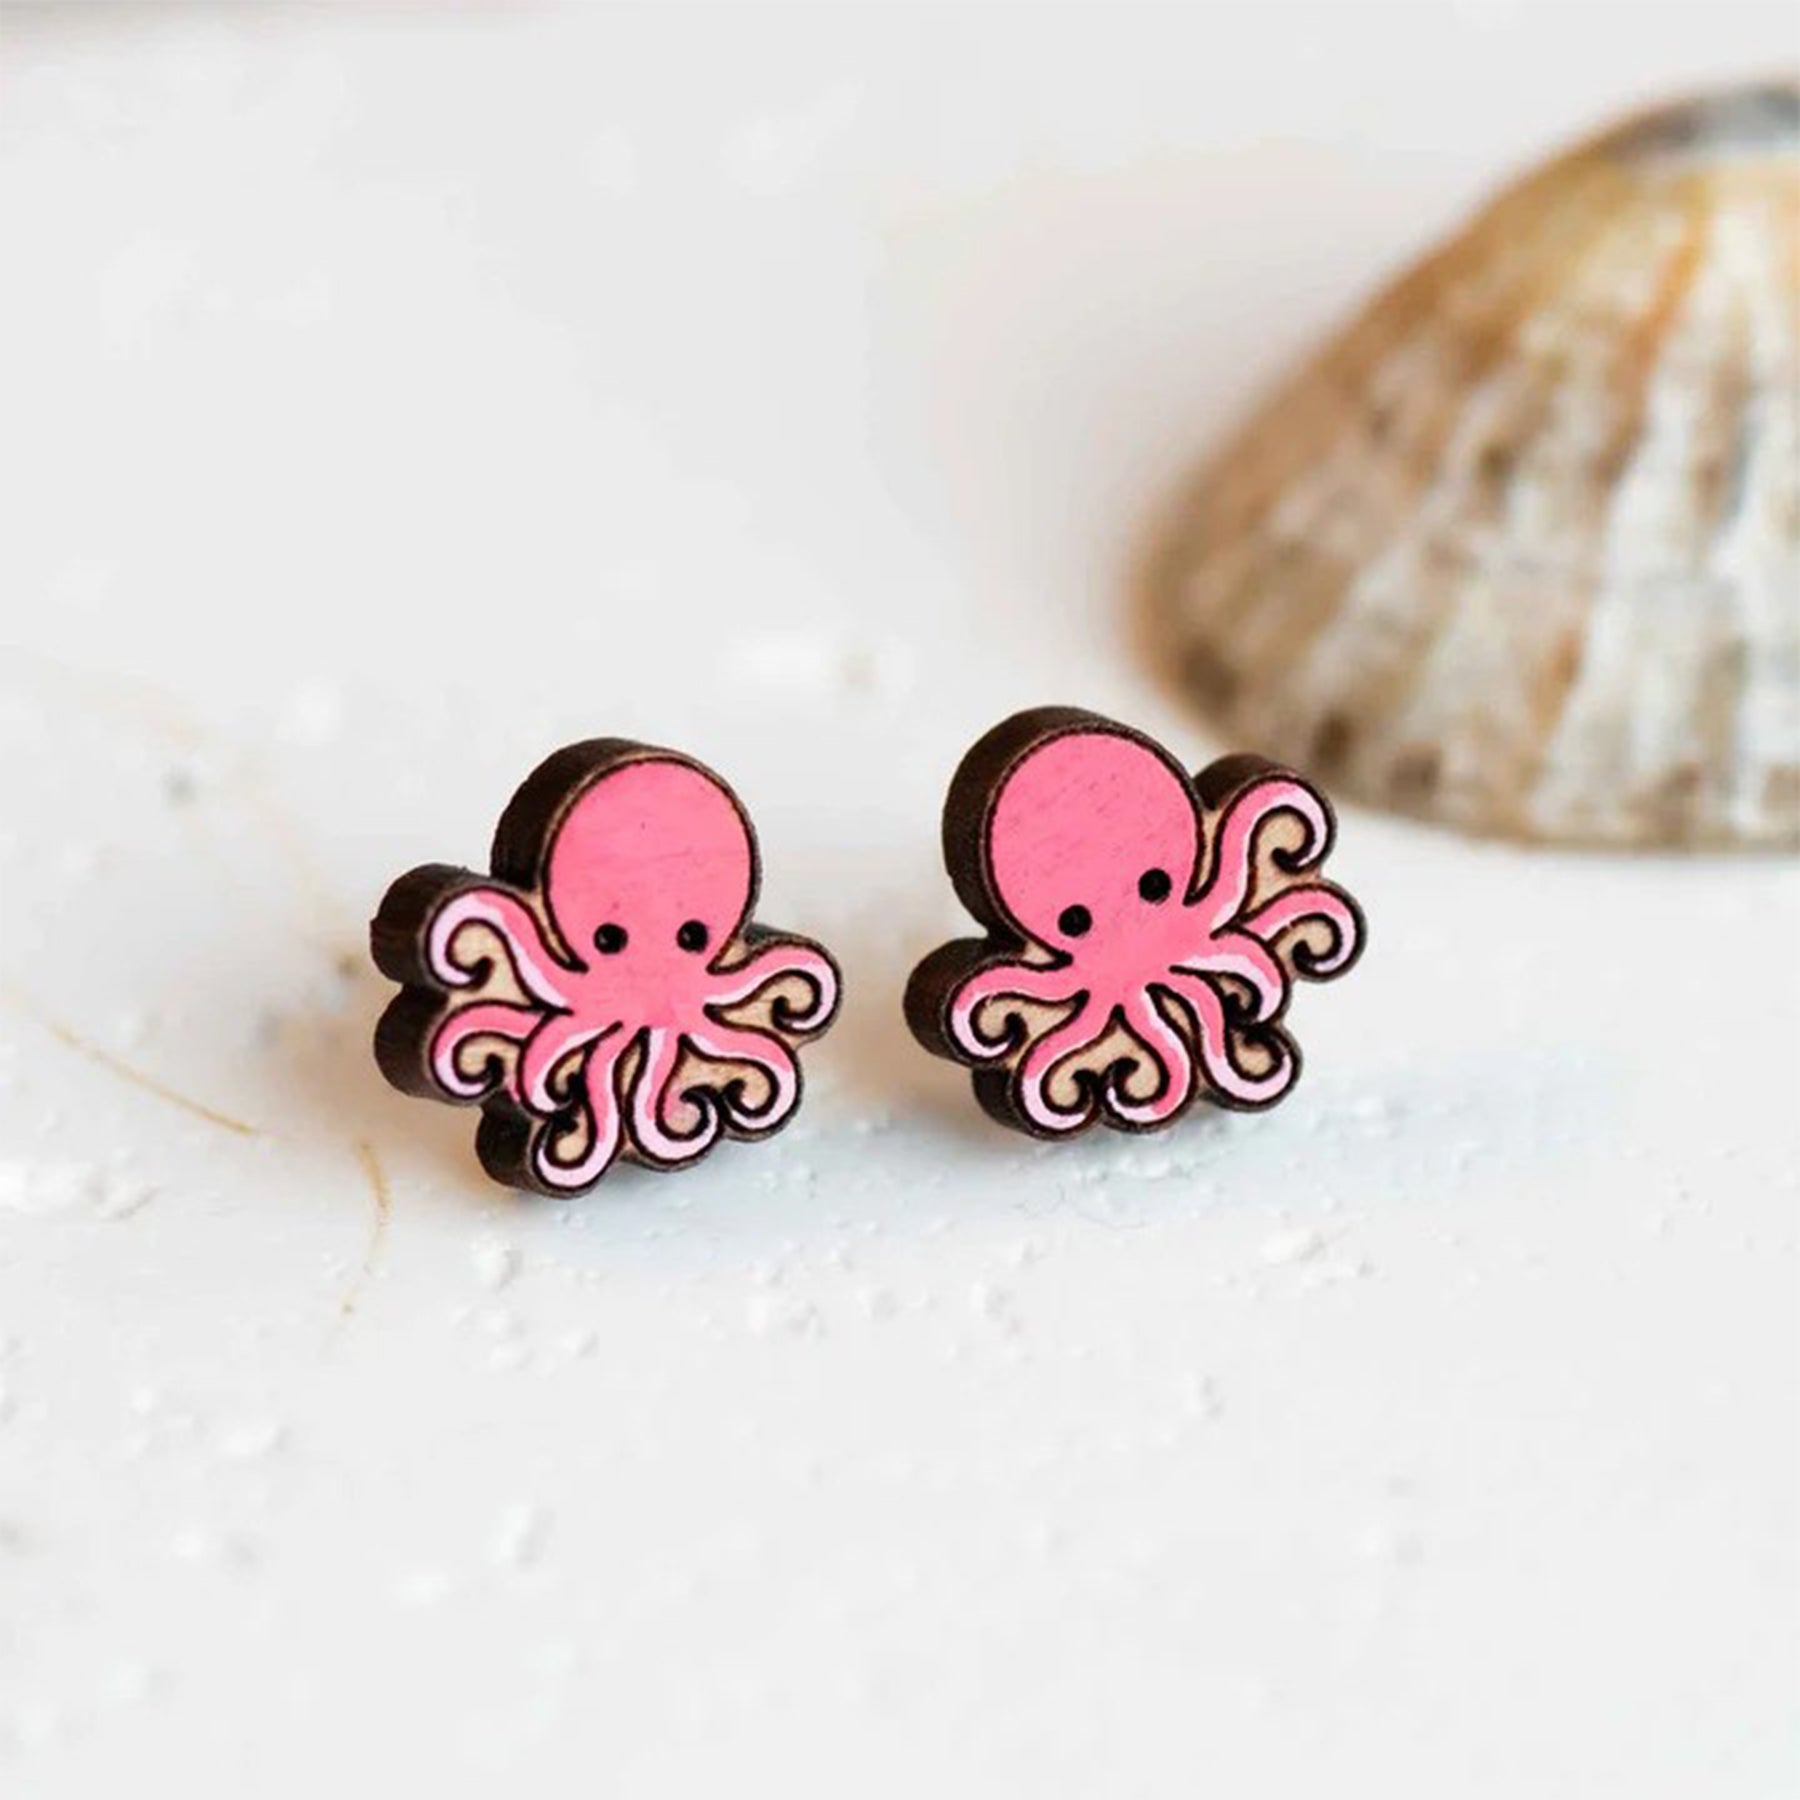 Octopus hand-painted wood pin badge